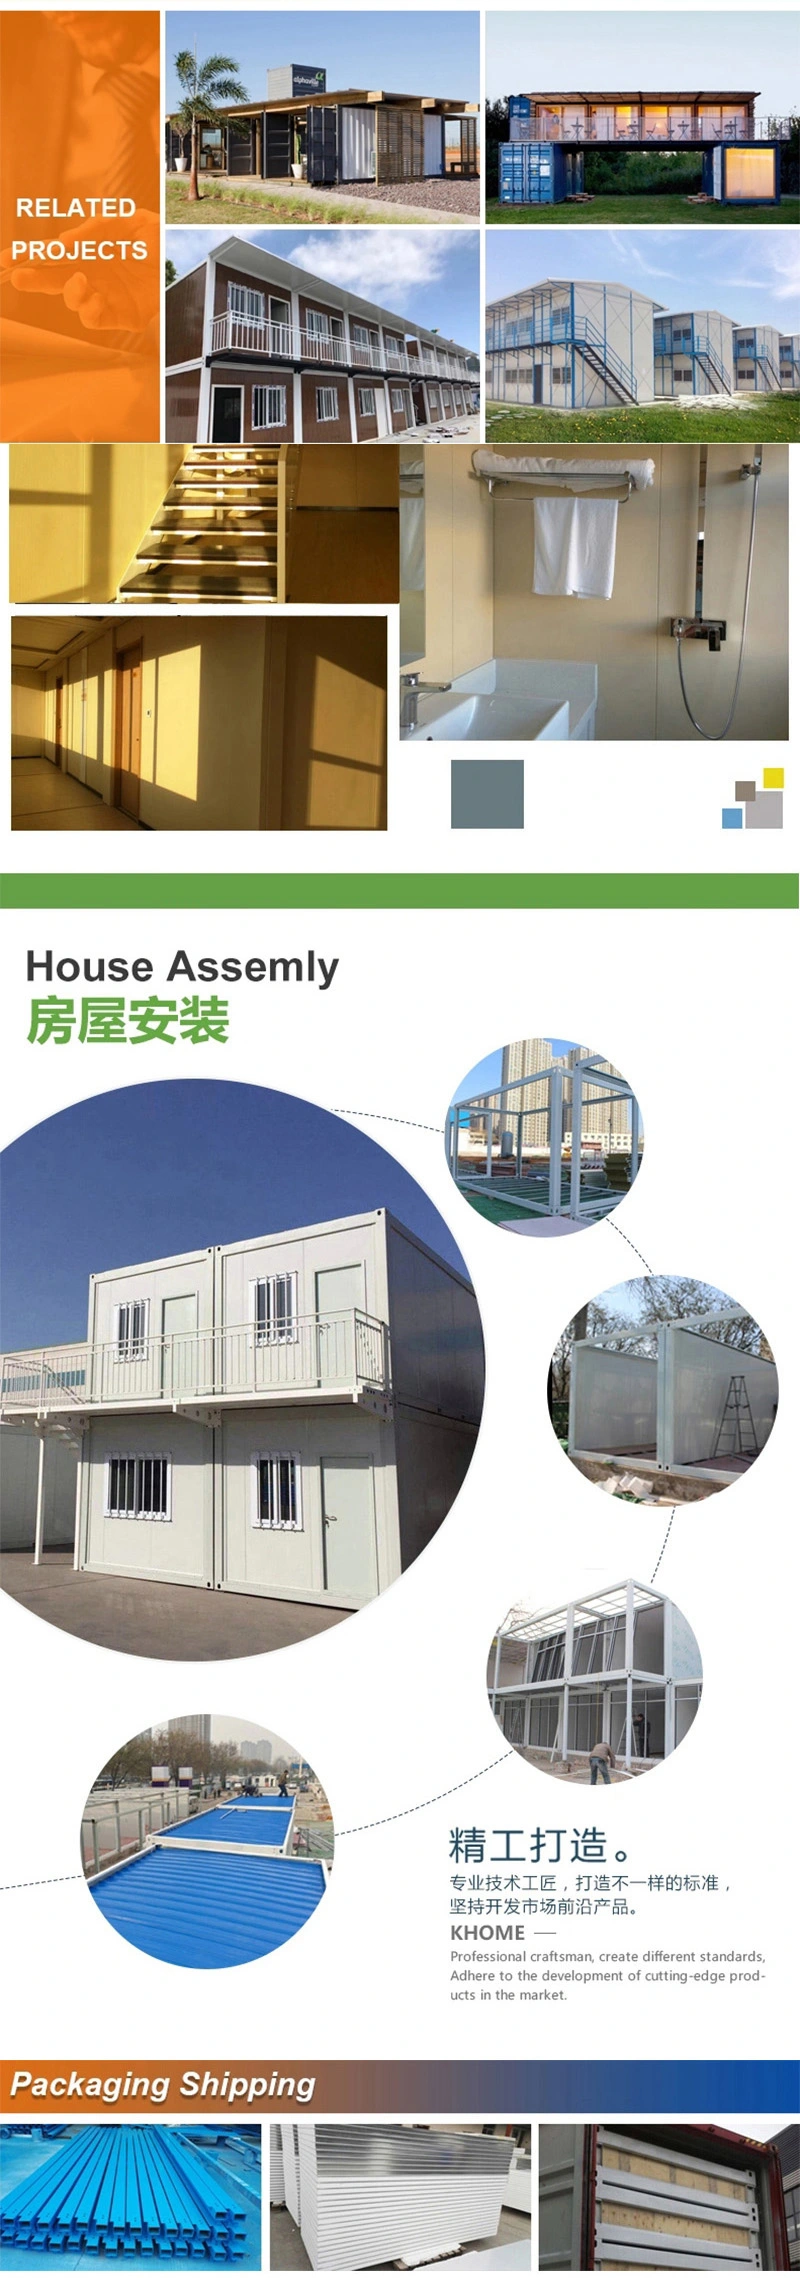 prefabricated hous,prefabricated portable container house,prefabricated mobile container house,prefabricated mobile office container,prefabricated container